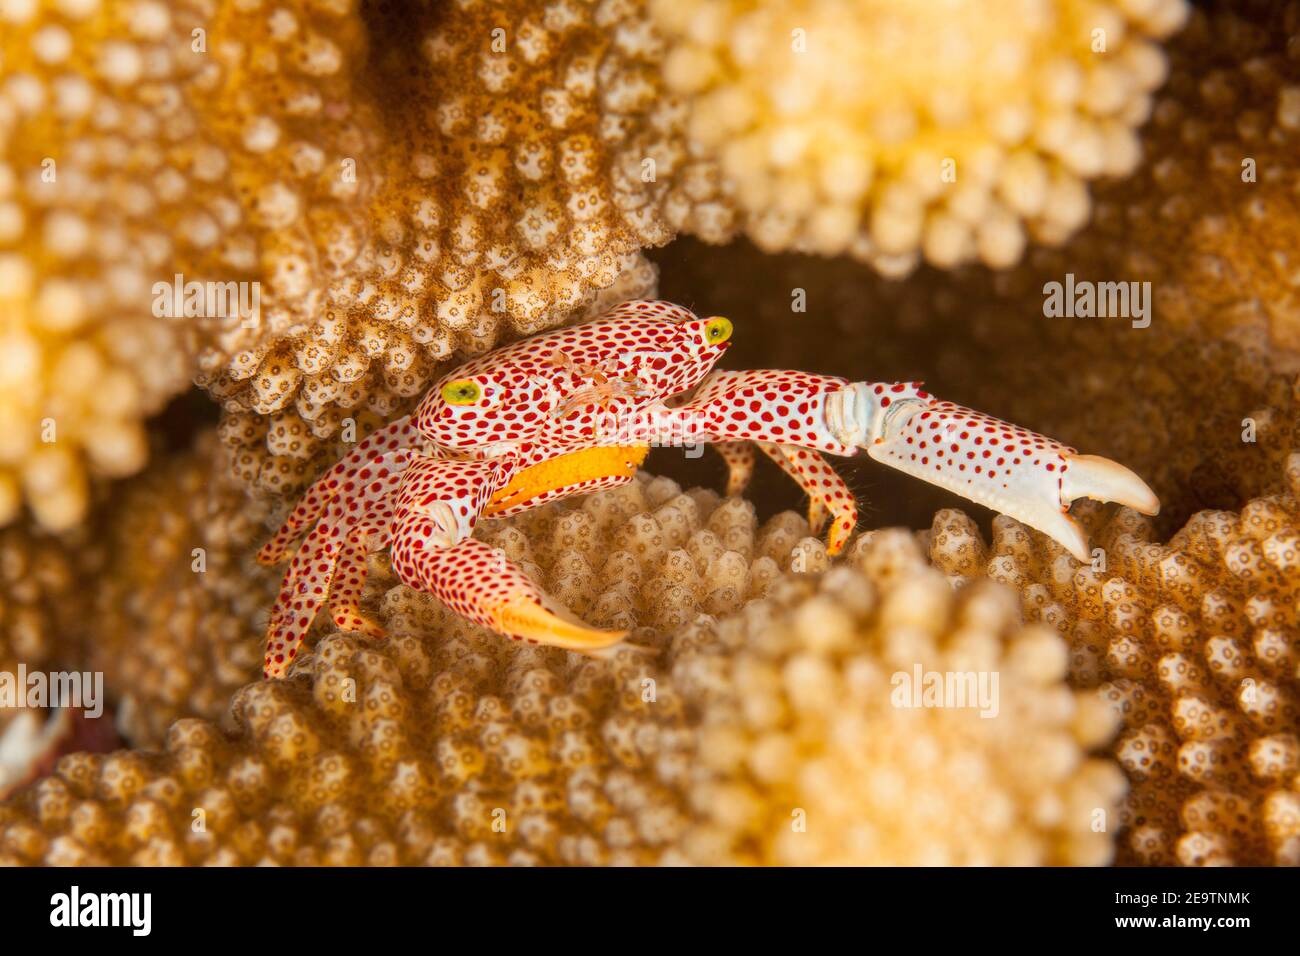 Red spotted guard crab, Trapezia tigrina, with eggs, in antler coral, Pocillopora eydouxi, Island of Yap, ( South Pacific), Micronesia. Stock Photo